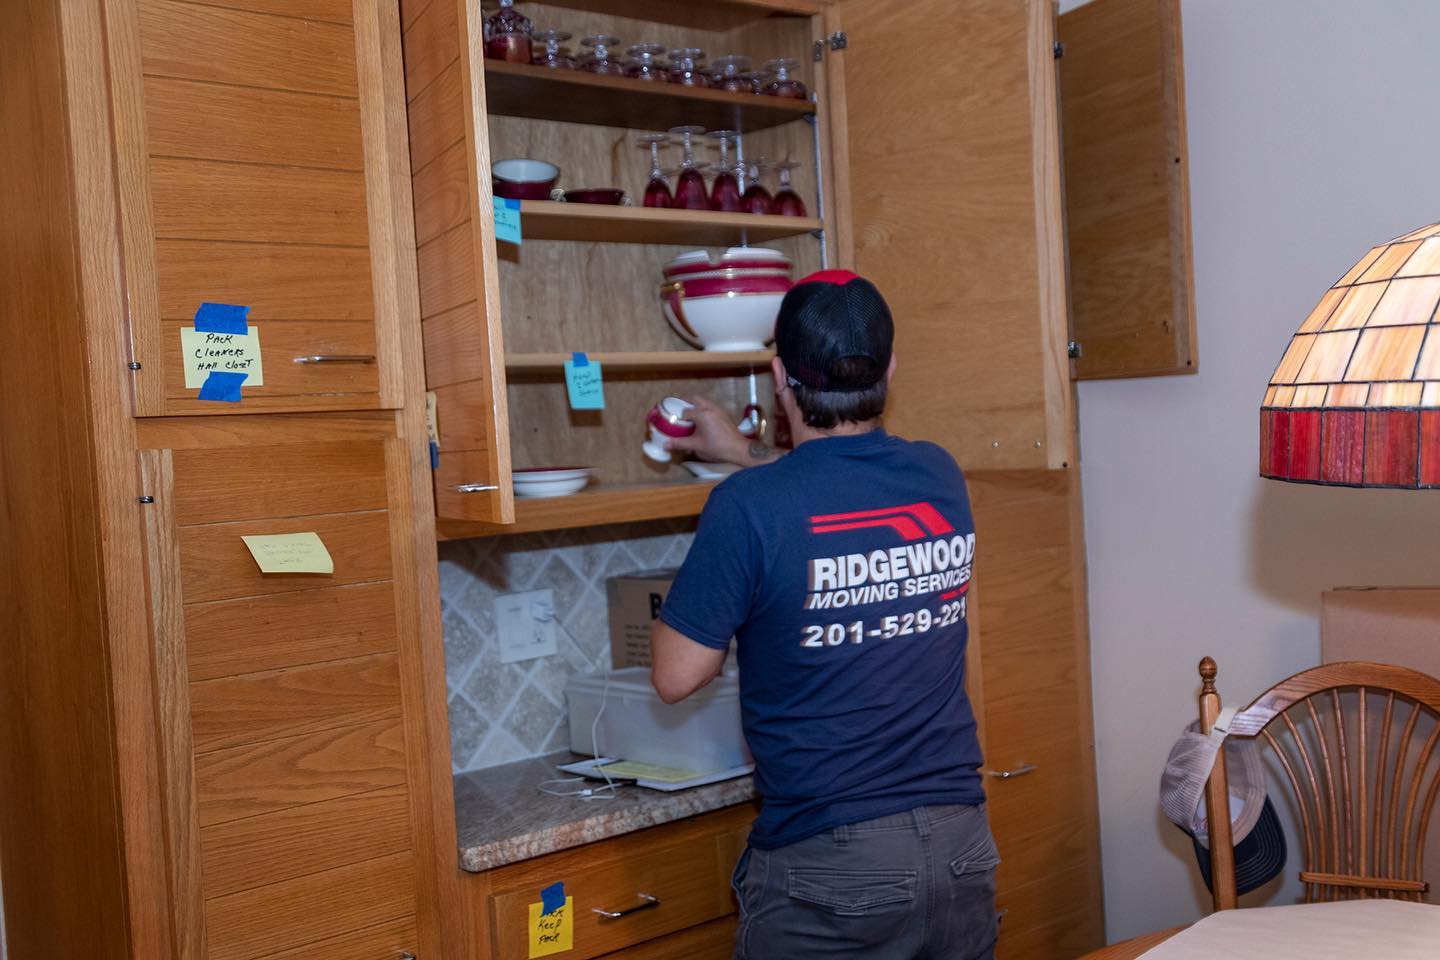 Organization is key at Ridgewood moving. We make sure that we stay organized throughout the entire process to ensure that your move is fun and stress-free!
.
.
.
#ridgewoodmoving #movingcompany #mivers #realestate #realtor #realestatelife #realtorlife #movingcompanynearme